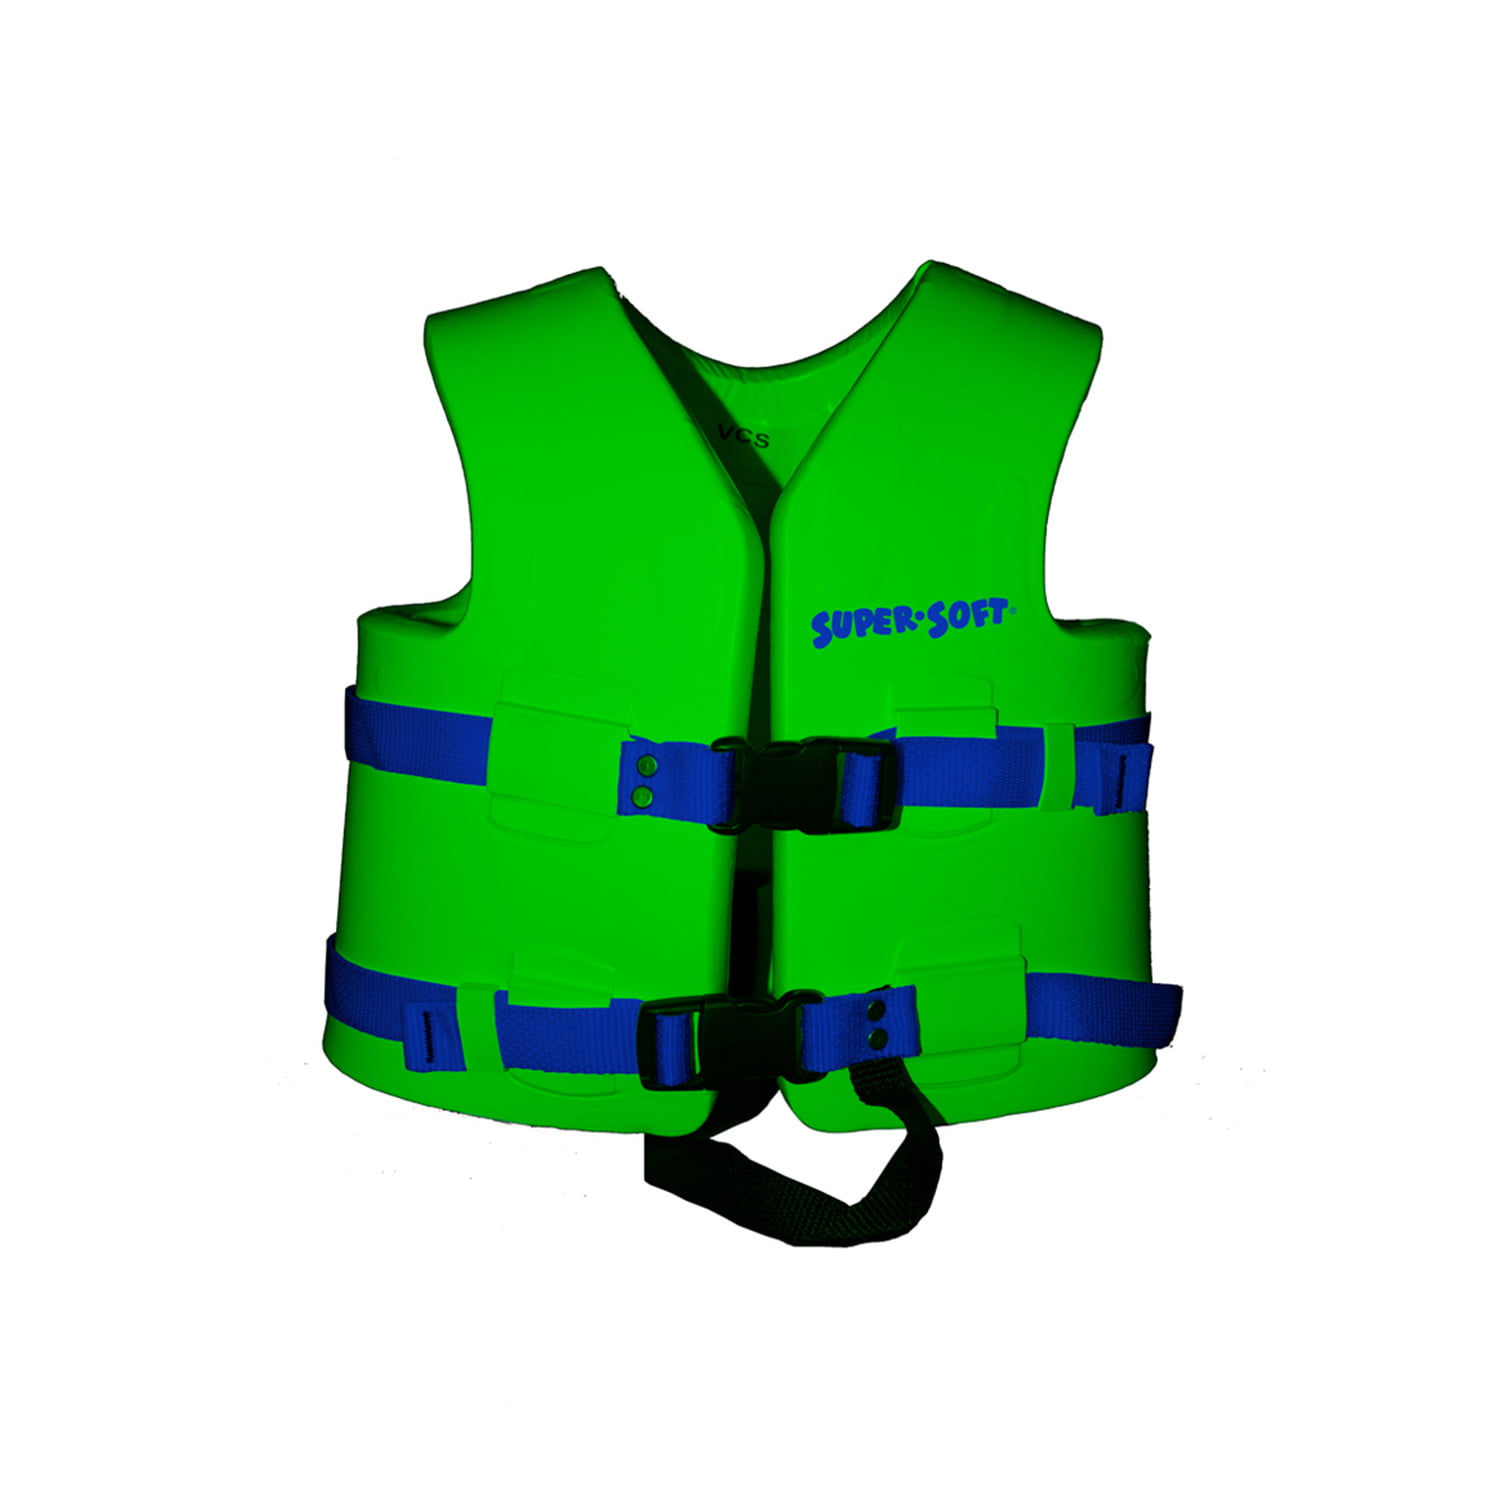 Details about   USCG Approved Child's Small Vinyl-Coated Foam Swim Vest Various Colors Available 